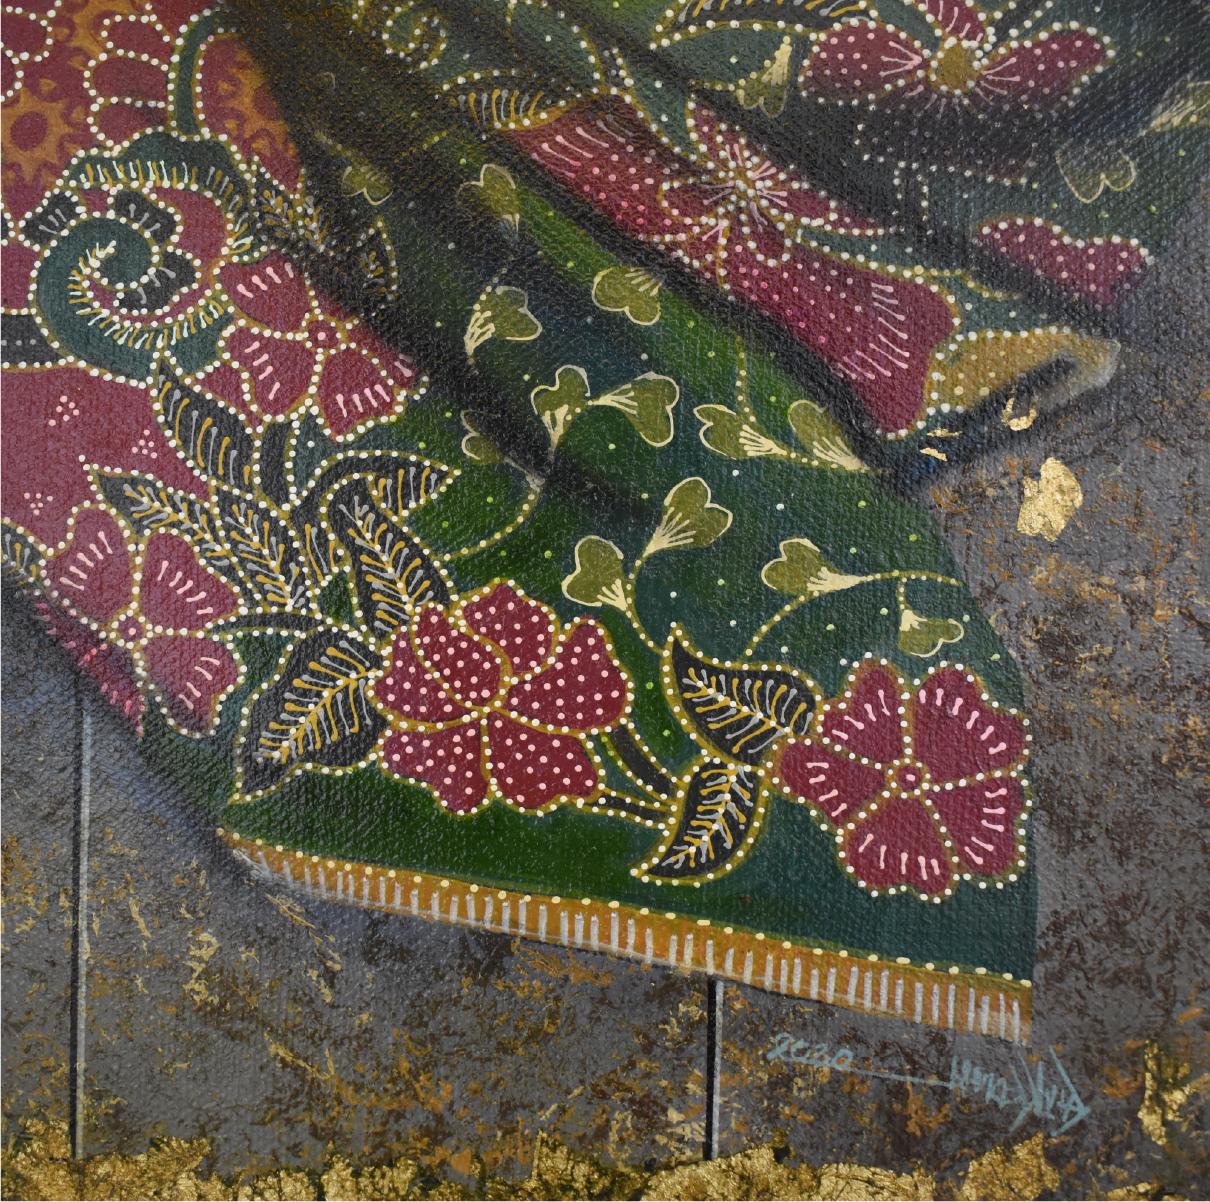 Colorful & Hyperrealistic Batik Painting On Jute Attached With Goldleafs  - Brown Still-Life Painting by Tony Ng